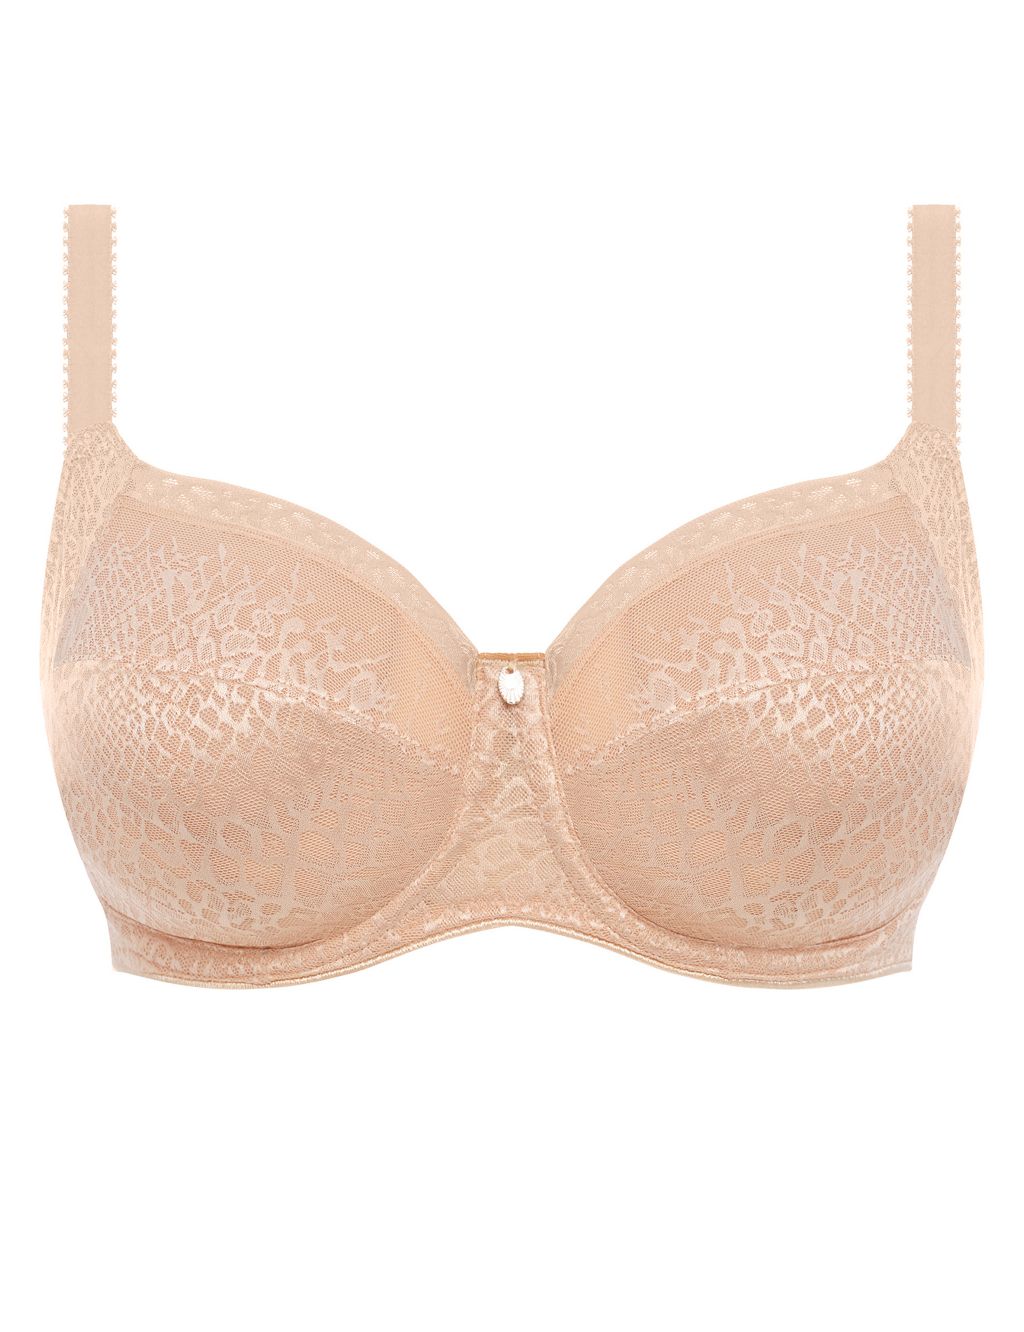 Envisage Wired Side Support Full Cup Bra D-HH 1 of 4